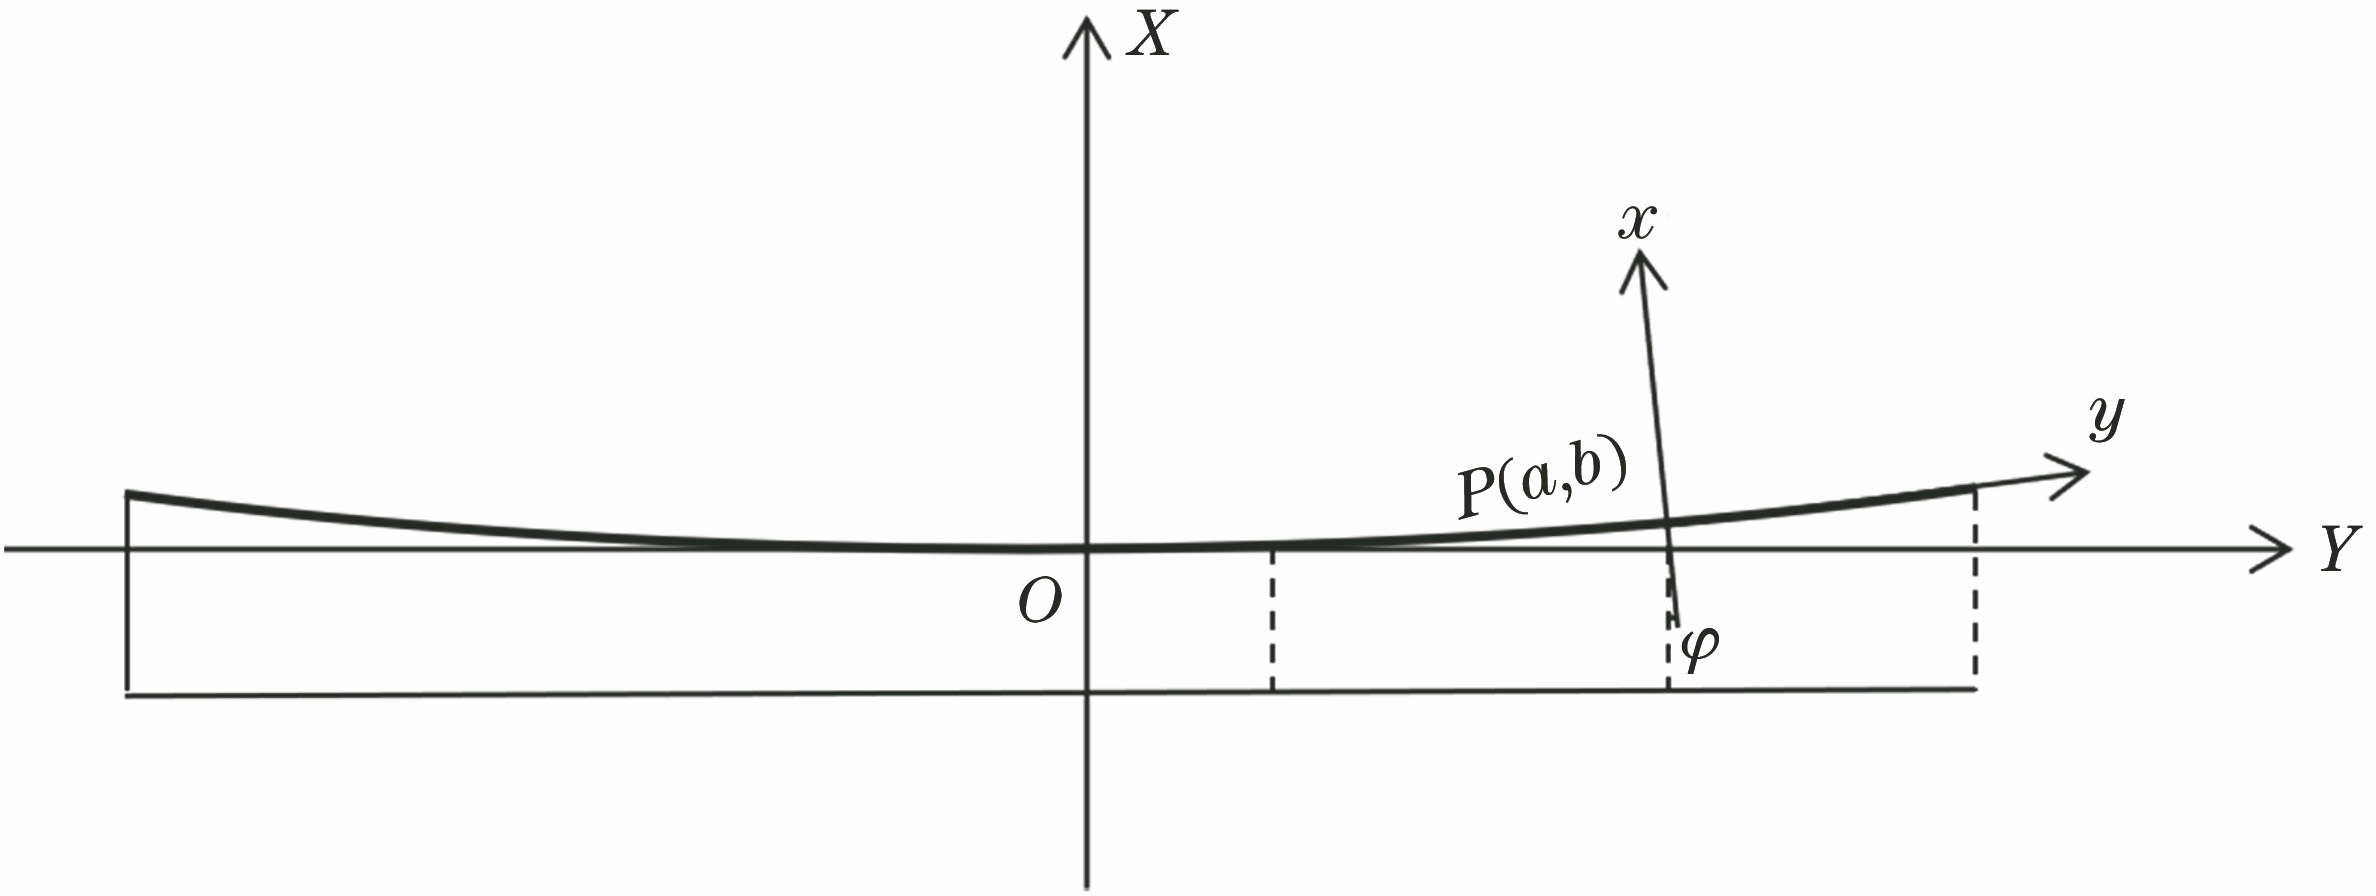 Schematic of coordinate transformation of off-axis parabolic mirror